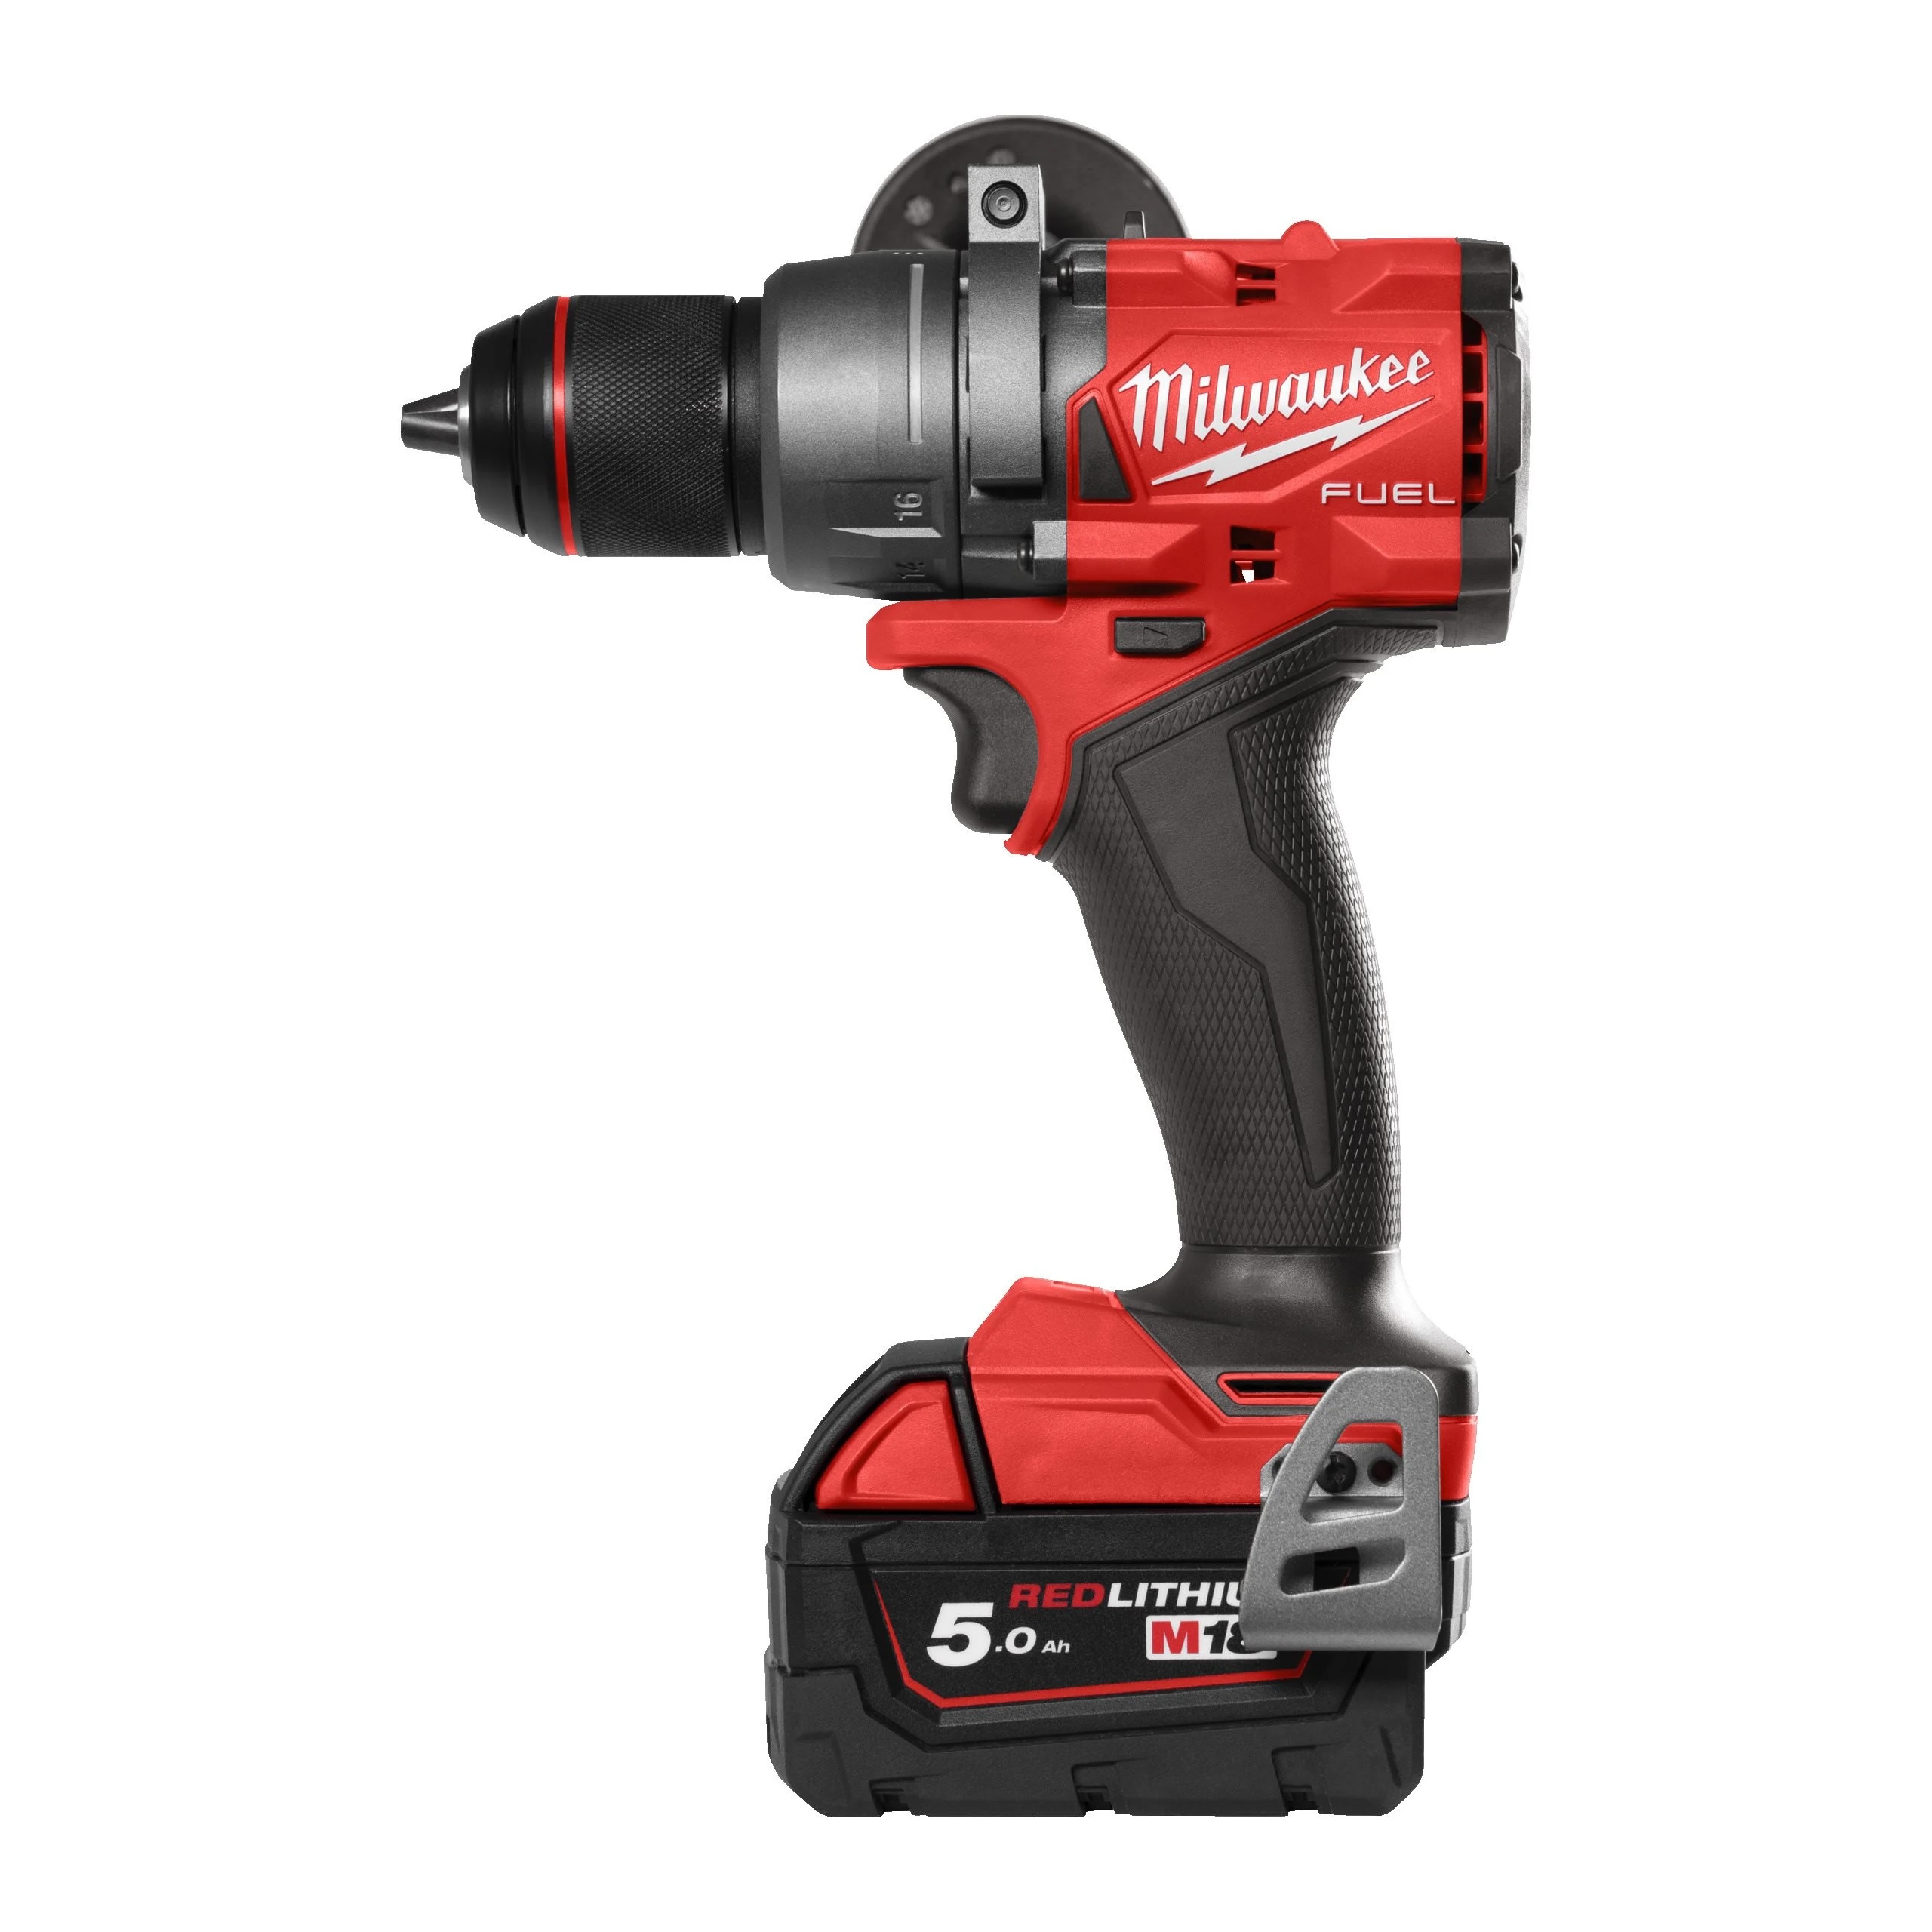 perceuse-agrave;-percussion-milwaukee-m18-fpd3-502x-2x50ah